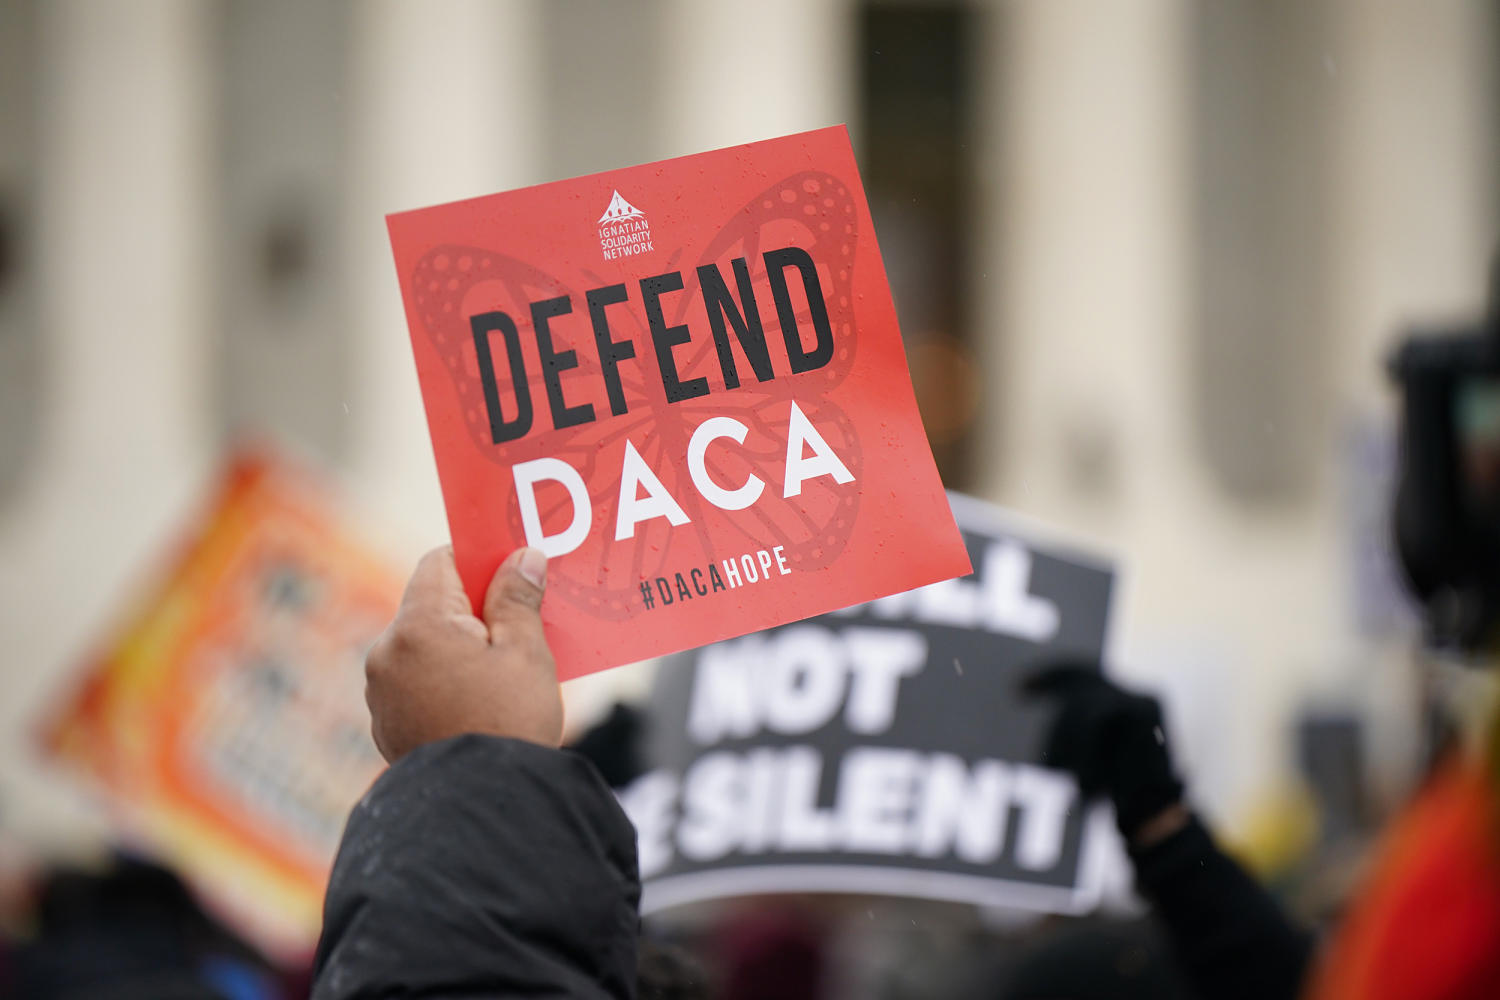 Dreamers urge protections in Senate hearing on immigrant youth